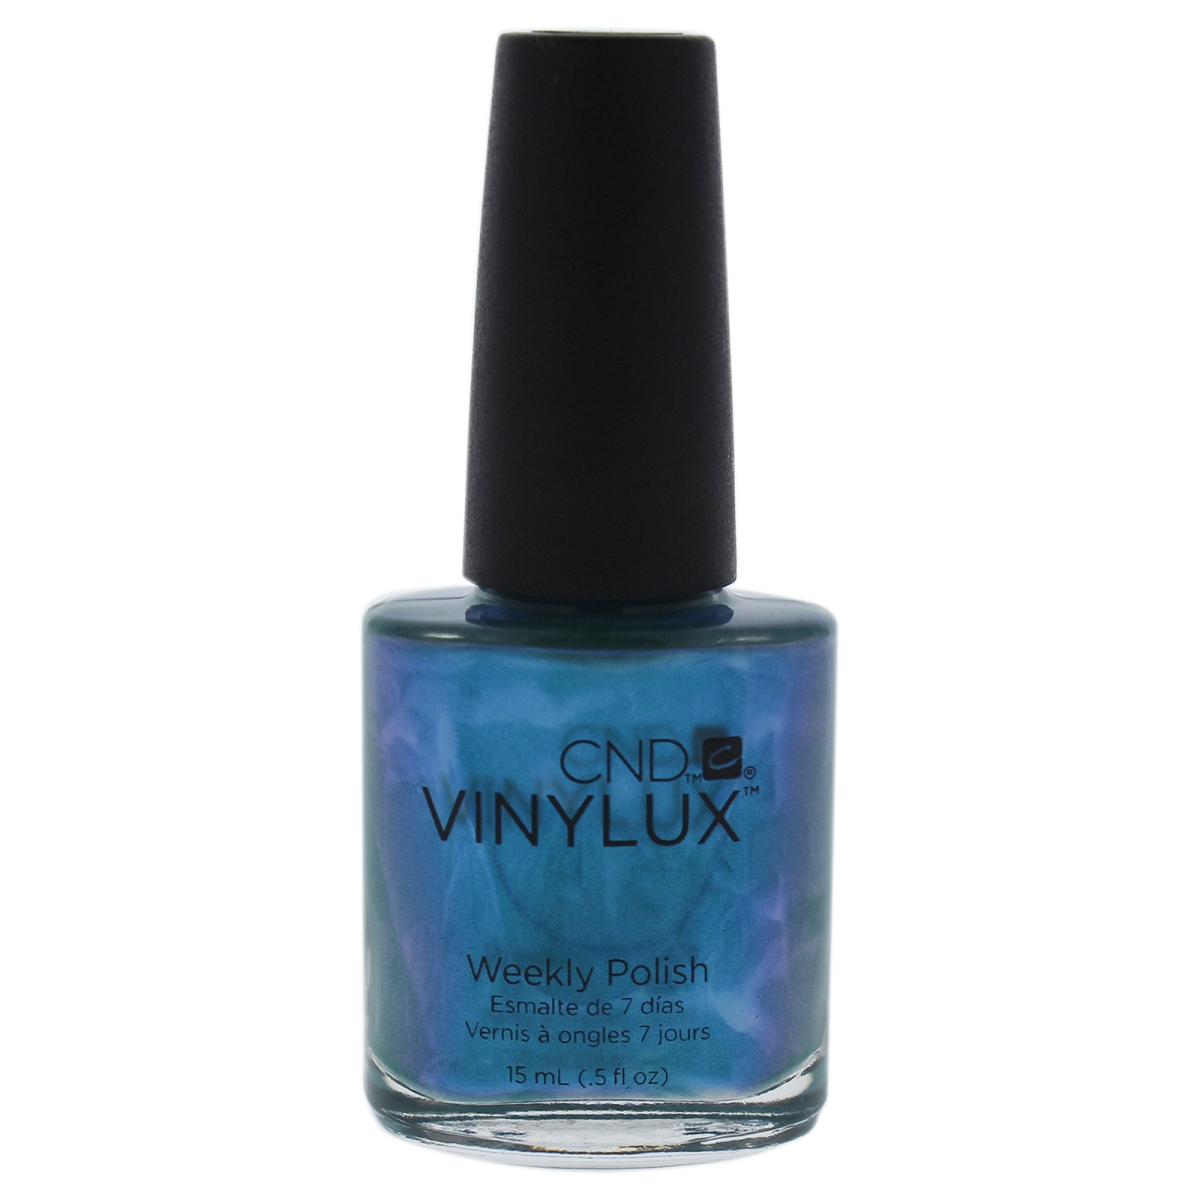 I0087631 Vinylux Weekly Nail Polish For Women - 191 Lost Labyrinth - 0.5 Oz